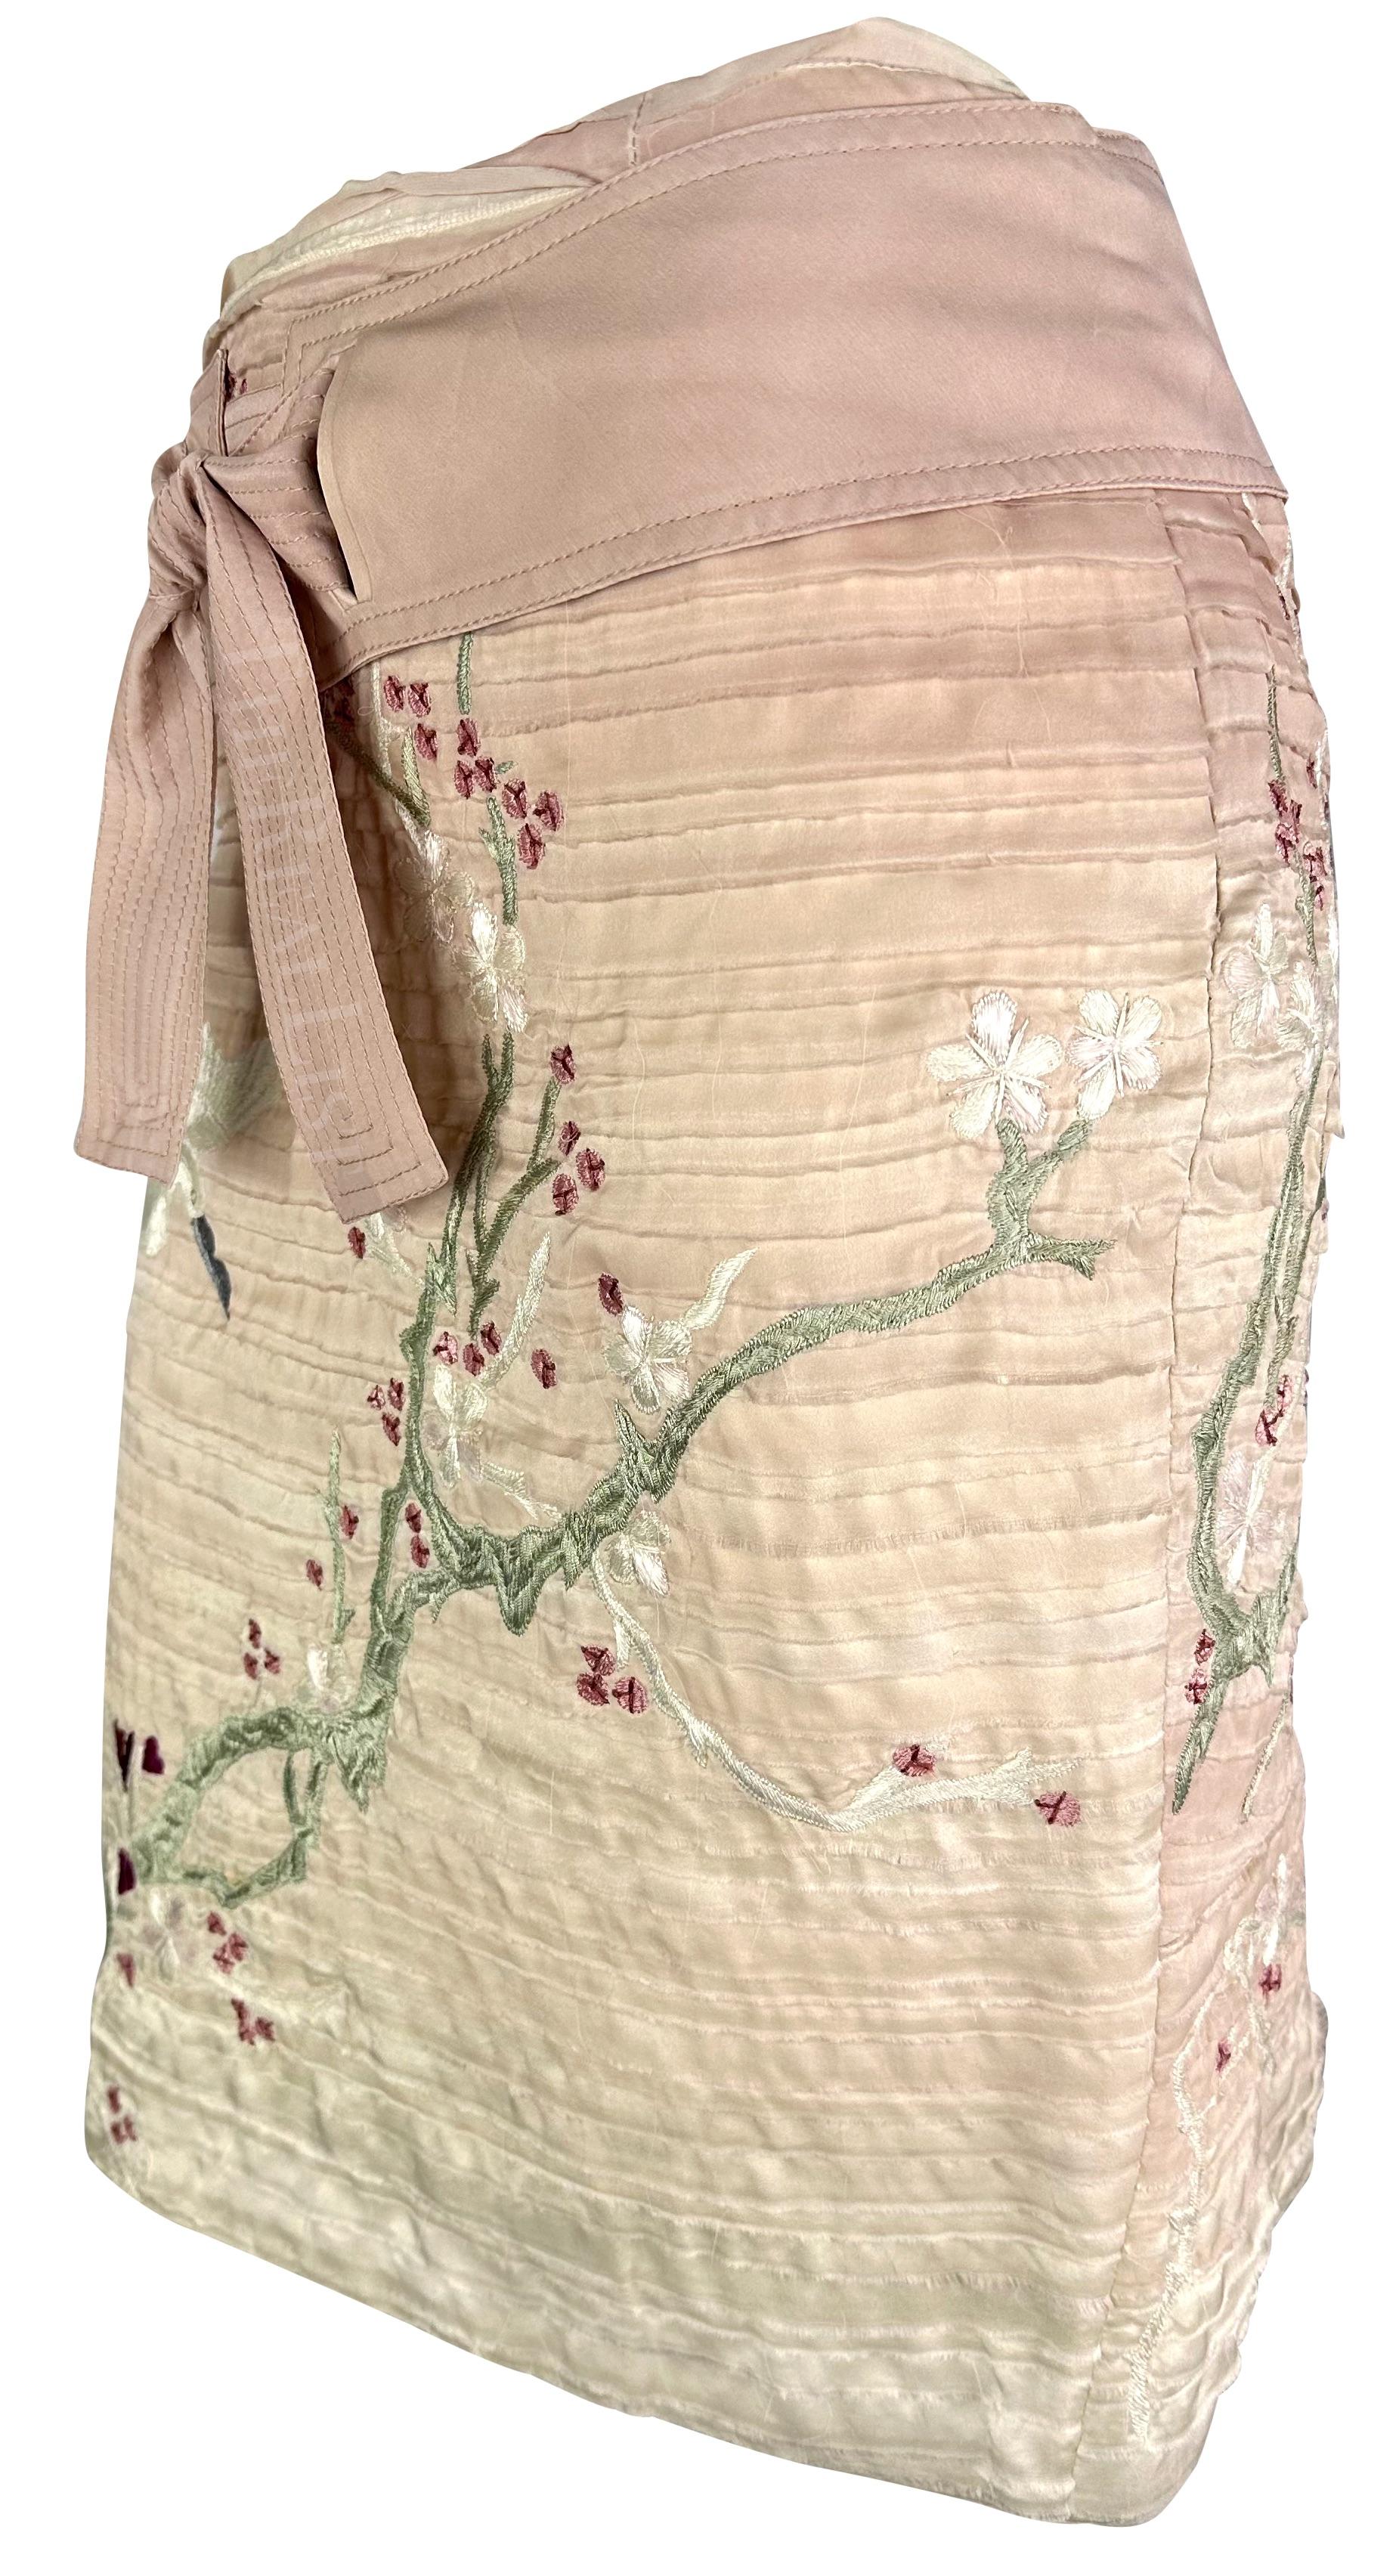 S/S 2003 Gucci by Tom Ford  Light Pink Cherry Blossom Embroidered Mini Skirt For Sale 2